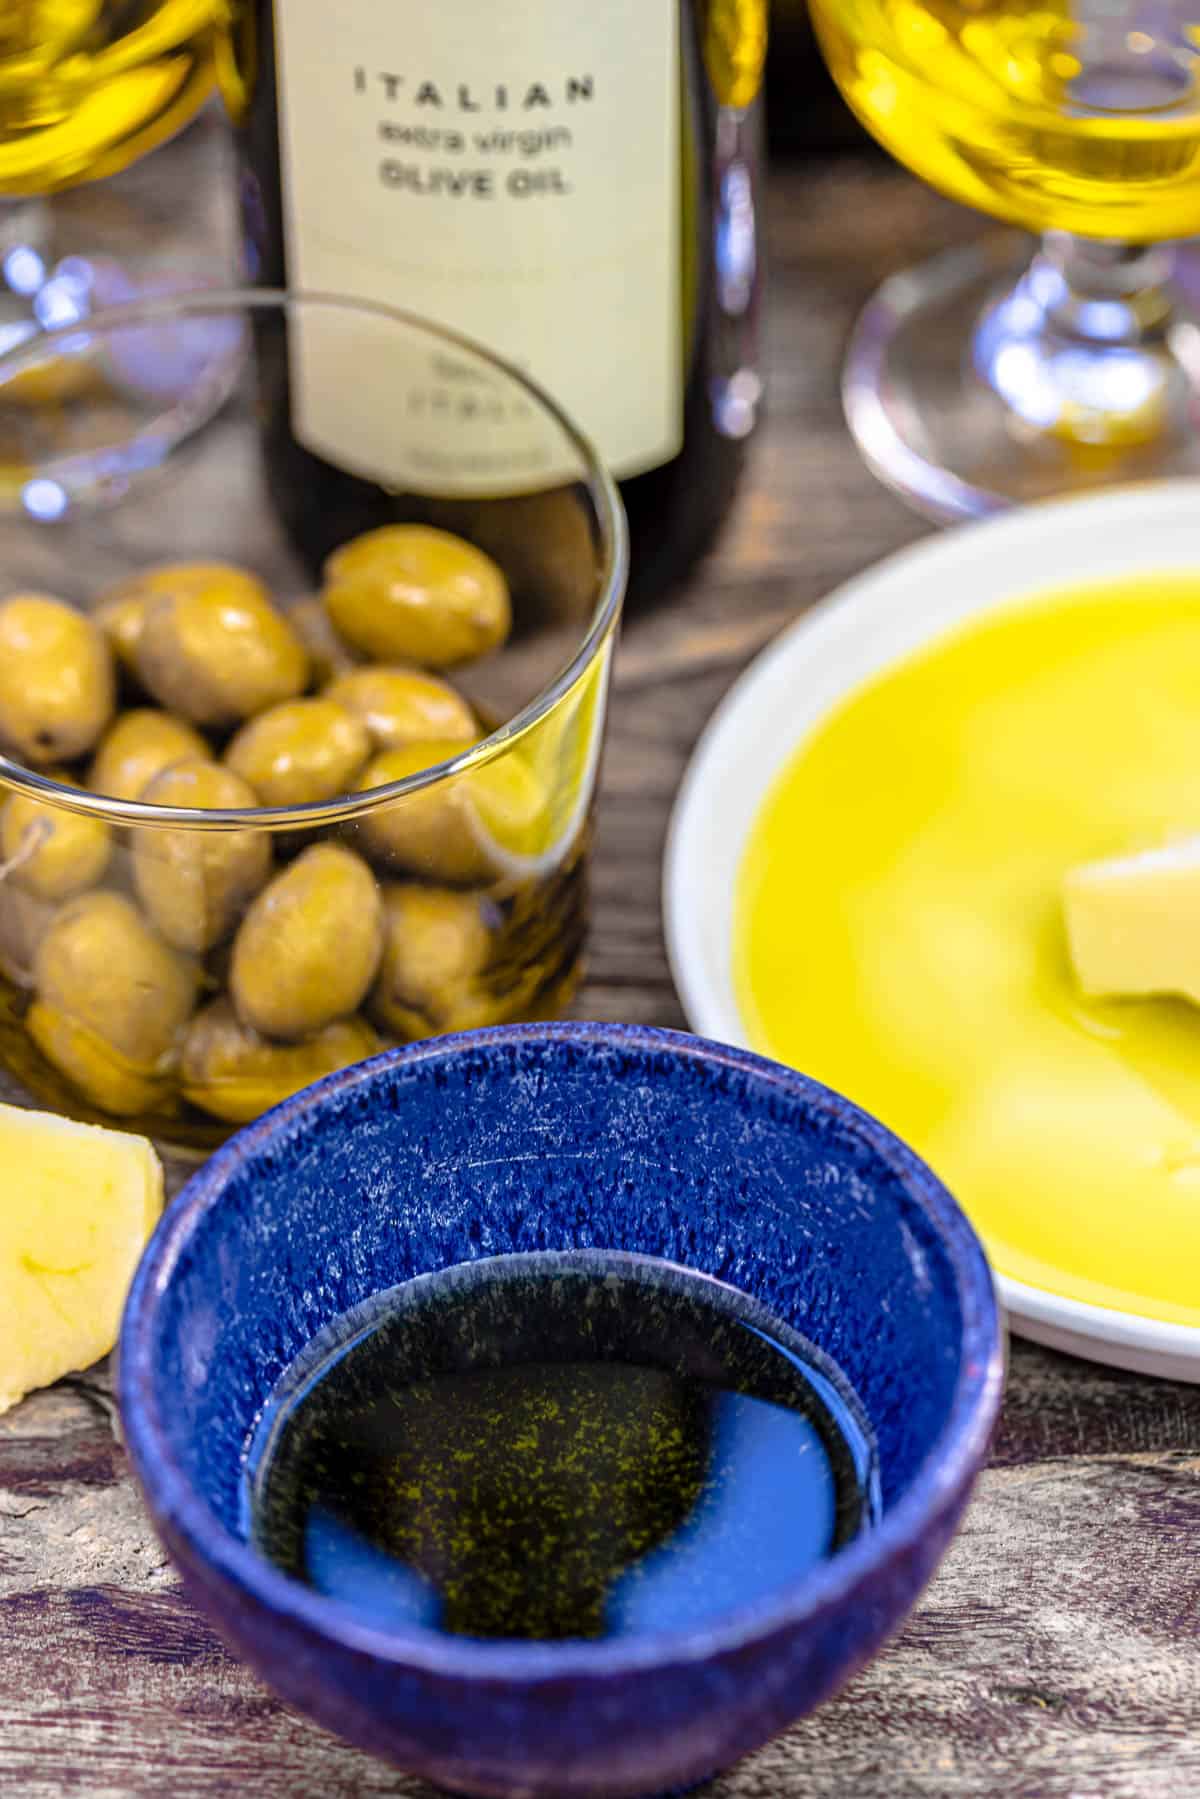 a close up of a small bowl of olive oil next to a bowl of green olives, a plate with olive oil, two small glasses containing olive oil and a bottle of olive oil.